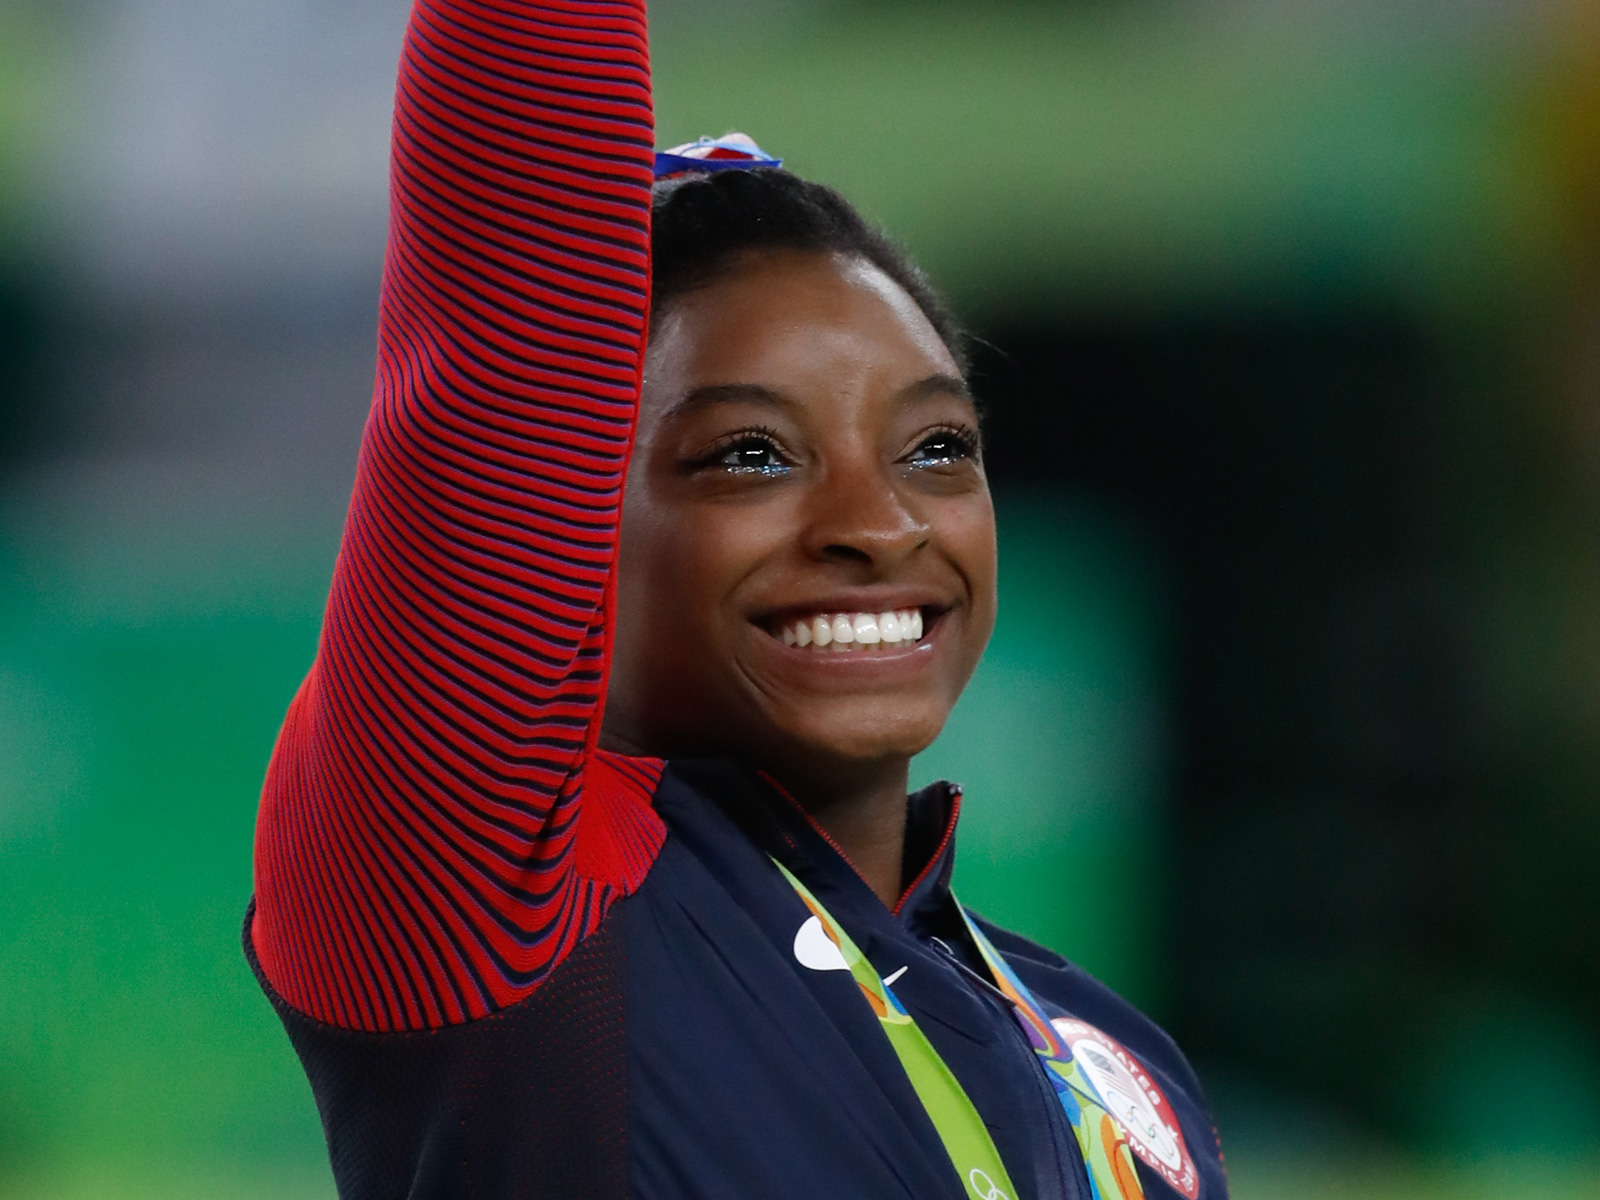 https://s39939.pcdn.co/wp-content/uploads/2021/08/Simone_Biles_at_the_2016_Olympics_all-around_gold_medal_podium_28262782114_cropped.jpg